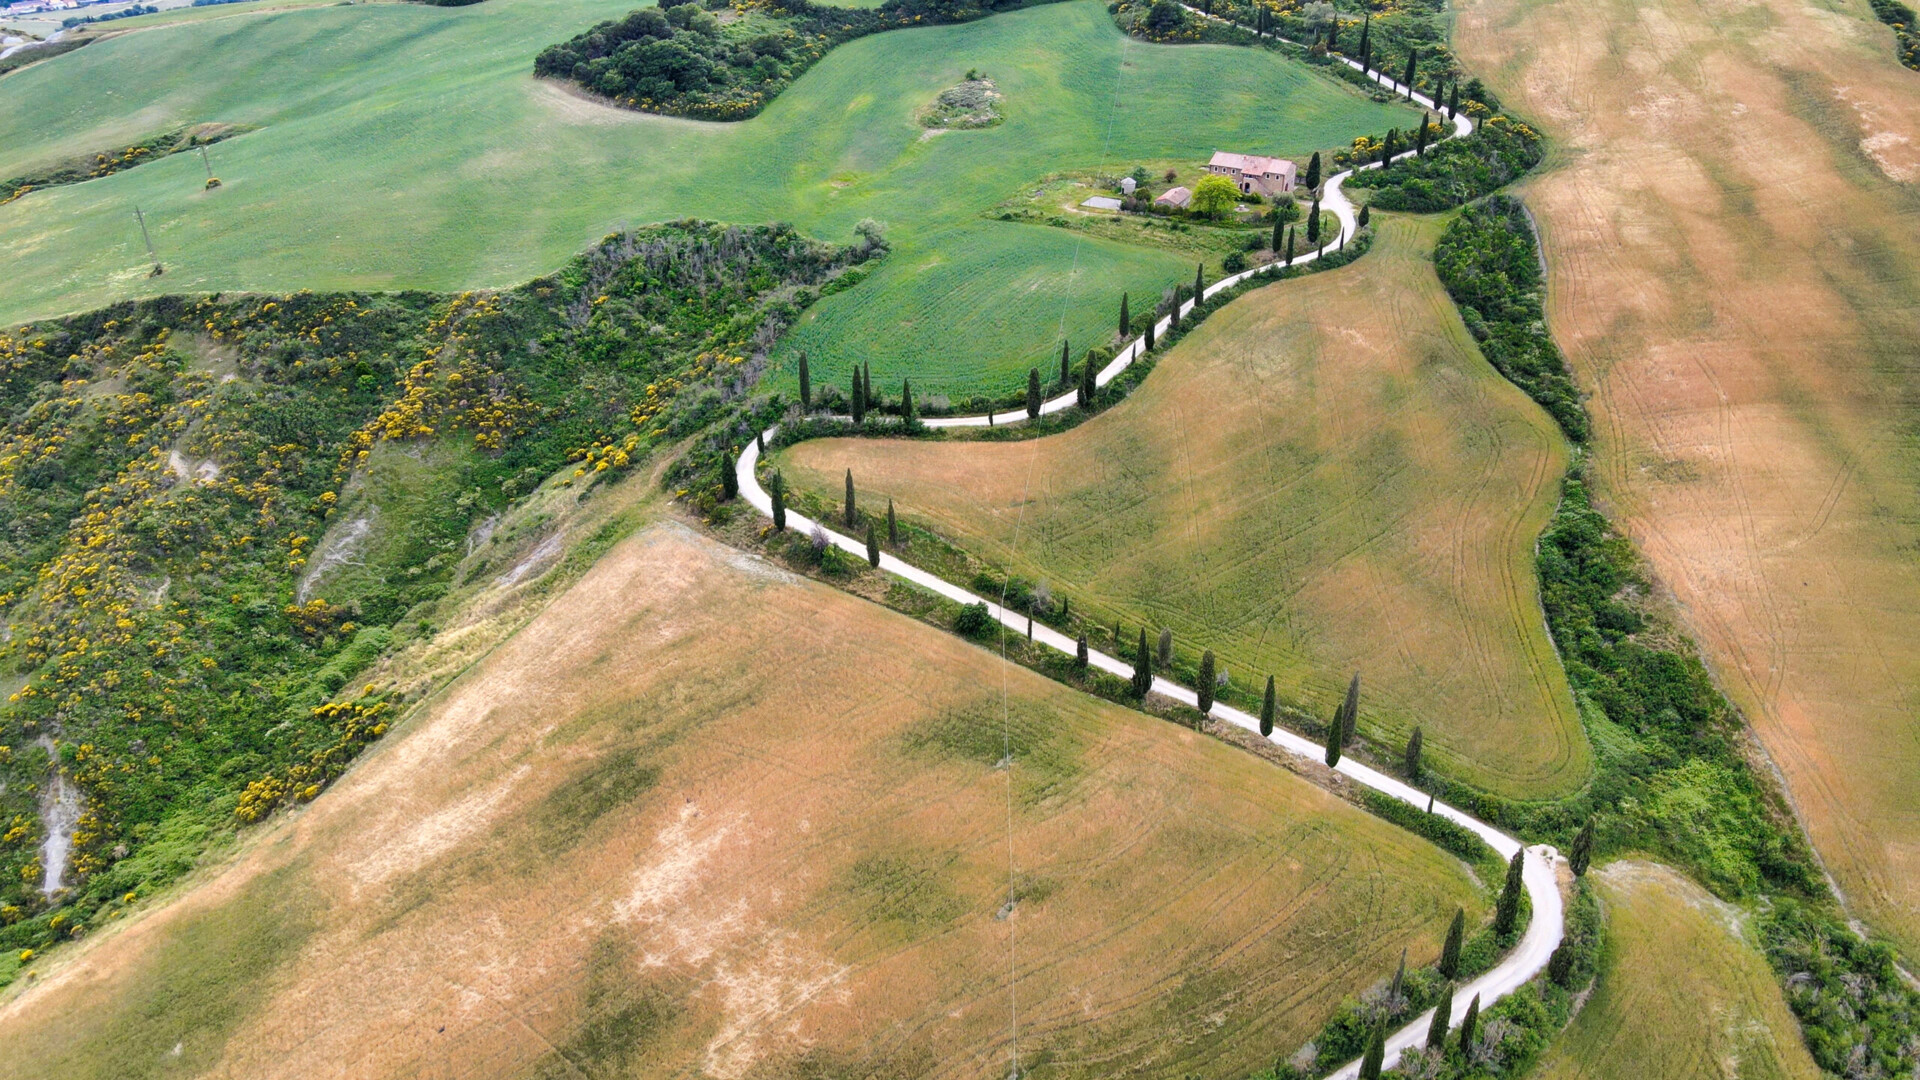 Famous cypress hill of Monticchiello, Tuscany. Aerial view from drone in spring season.